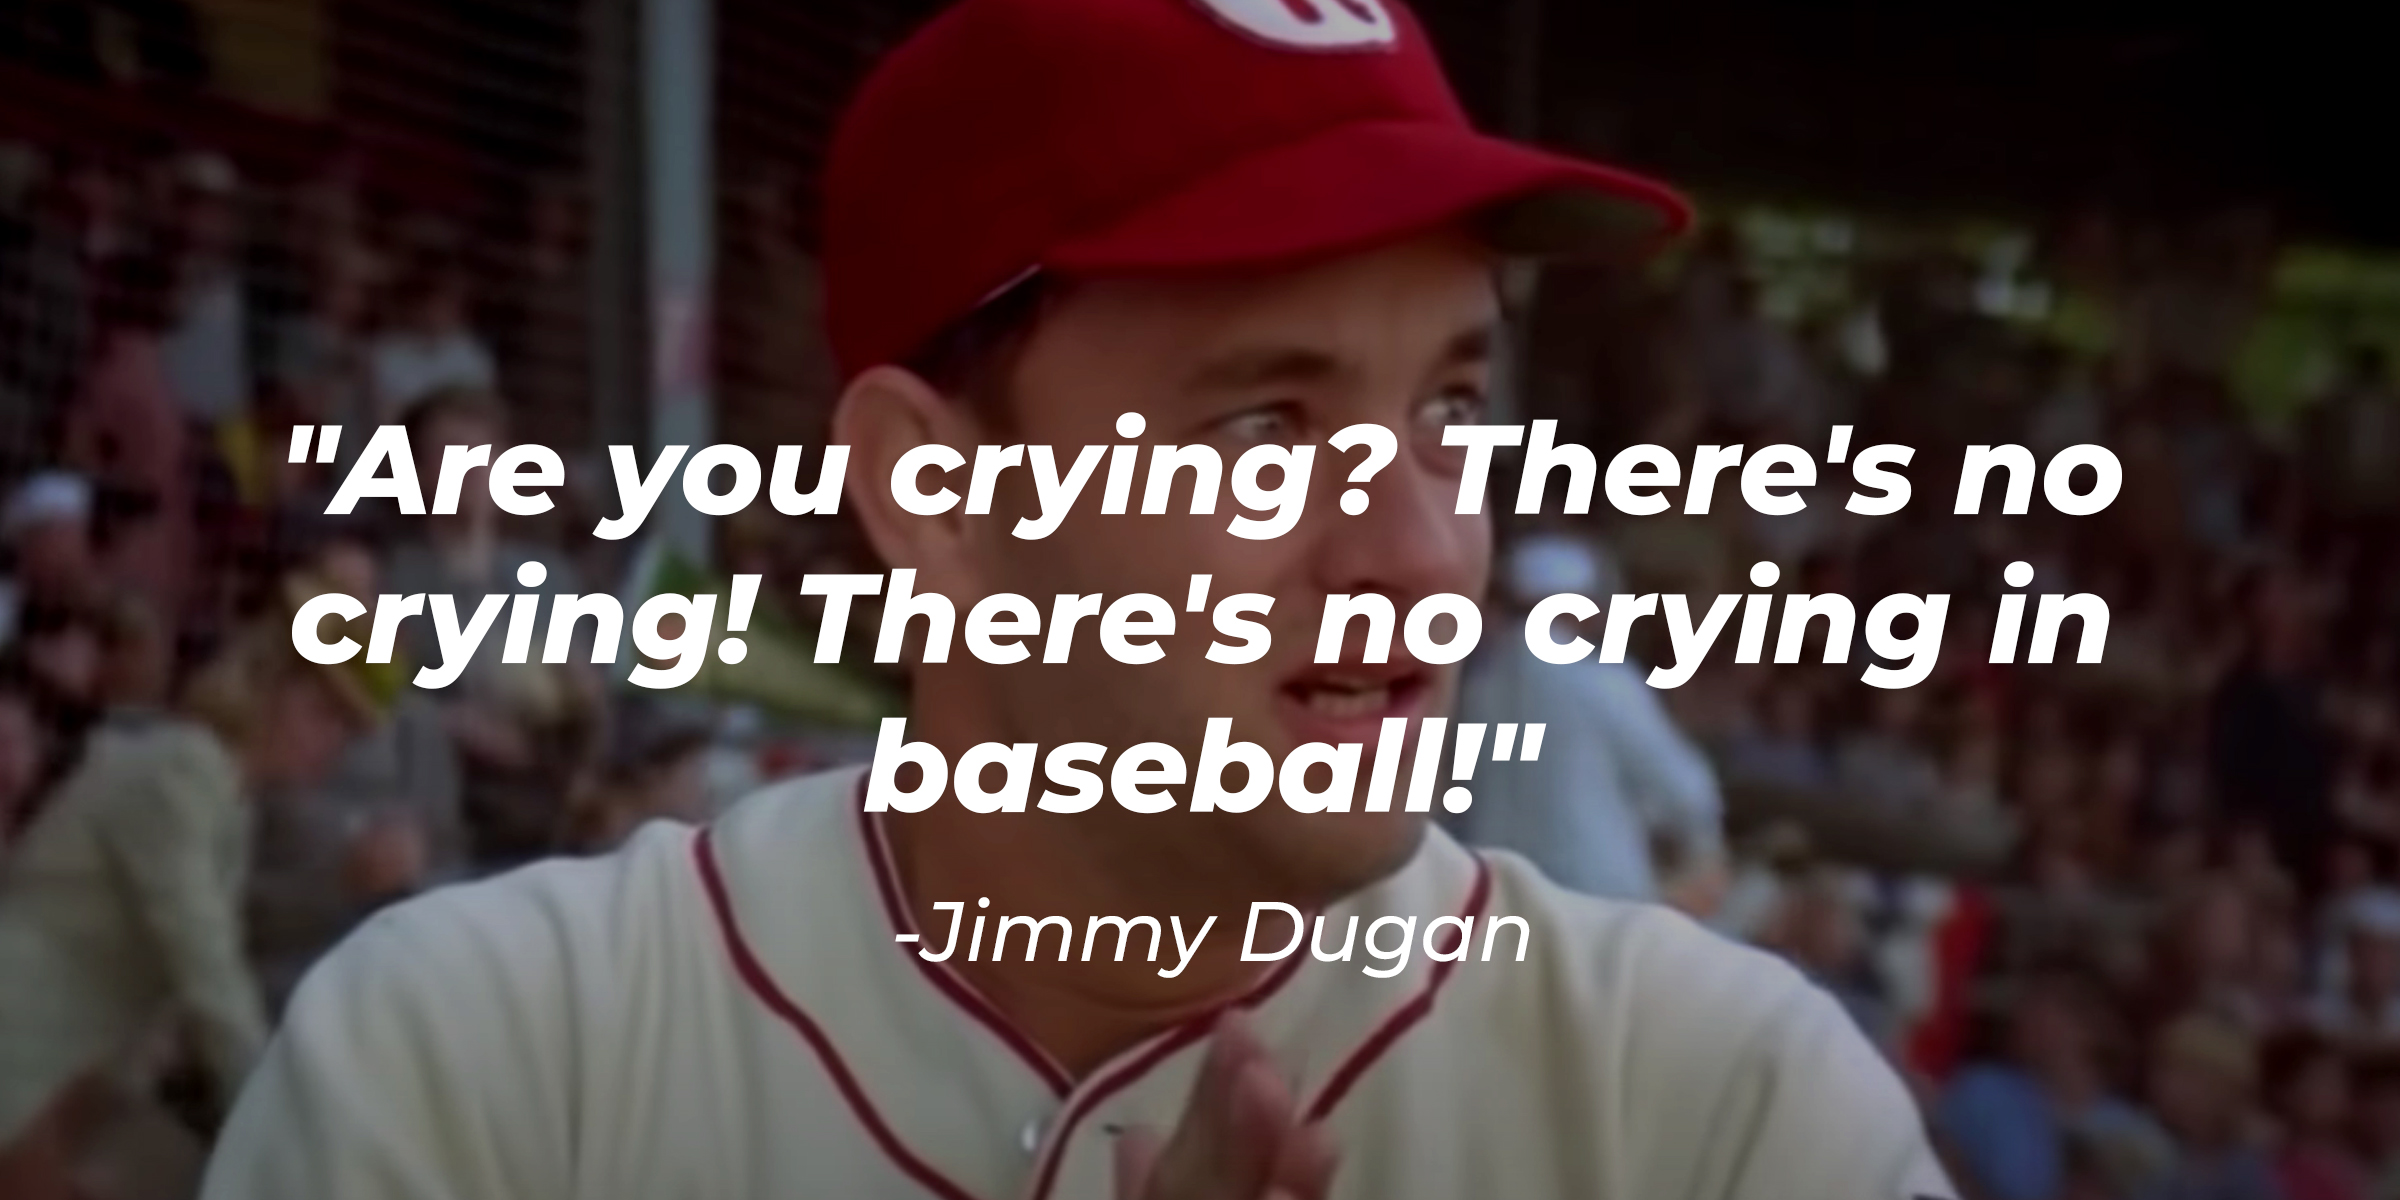 Jimmy Dugan's quote: "Are you crying? There's no crying! There's no crying in baseball!" | Source: Facebook/ALeagueOfTheirOwnMovie